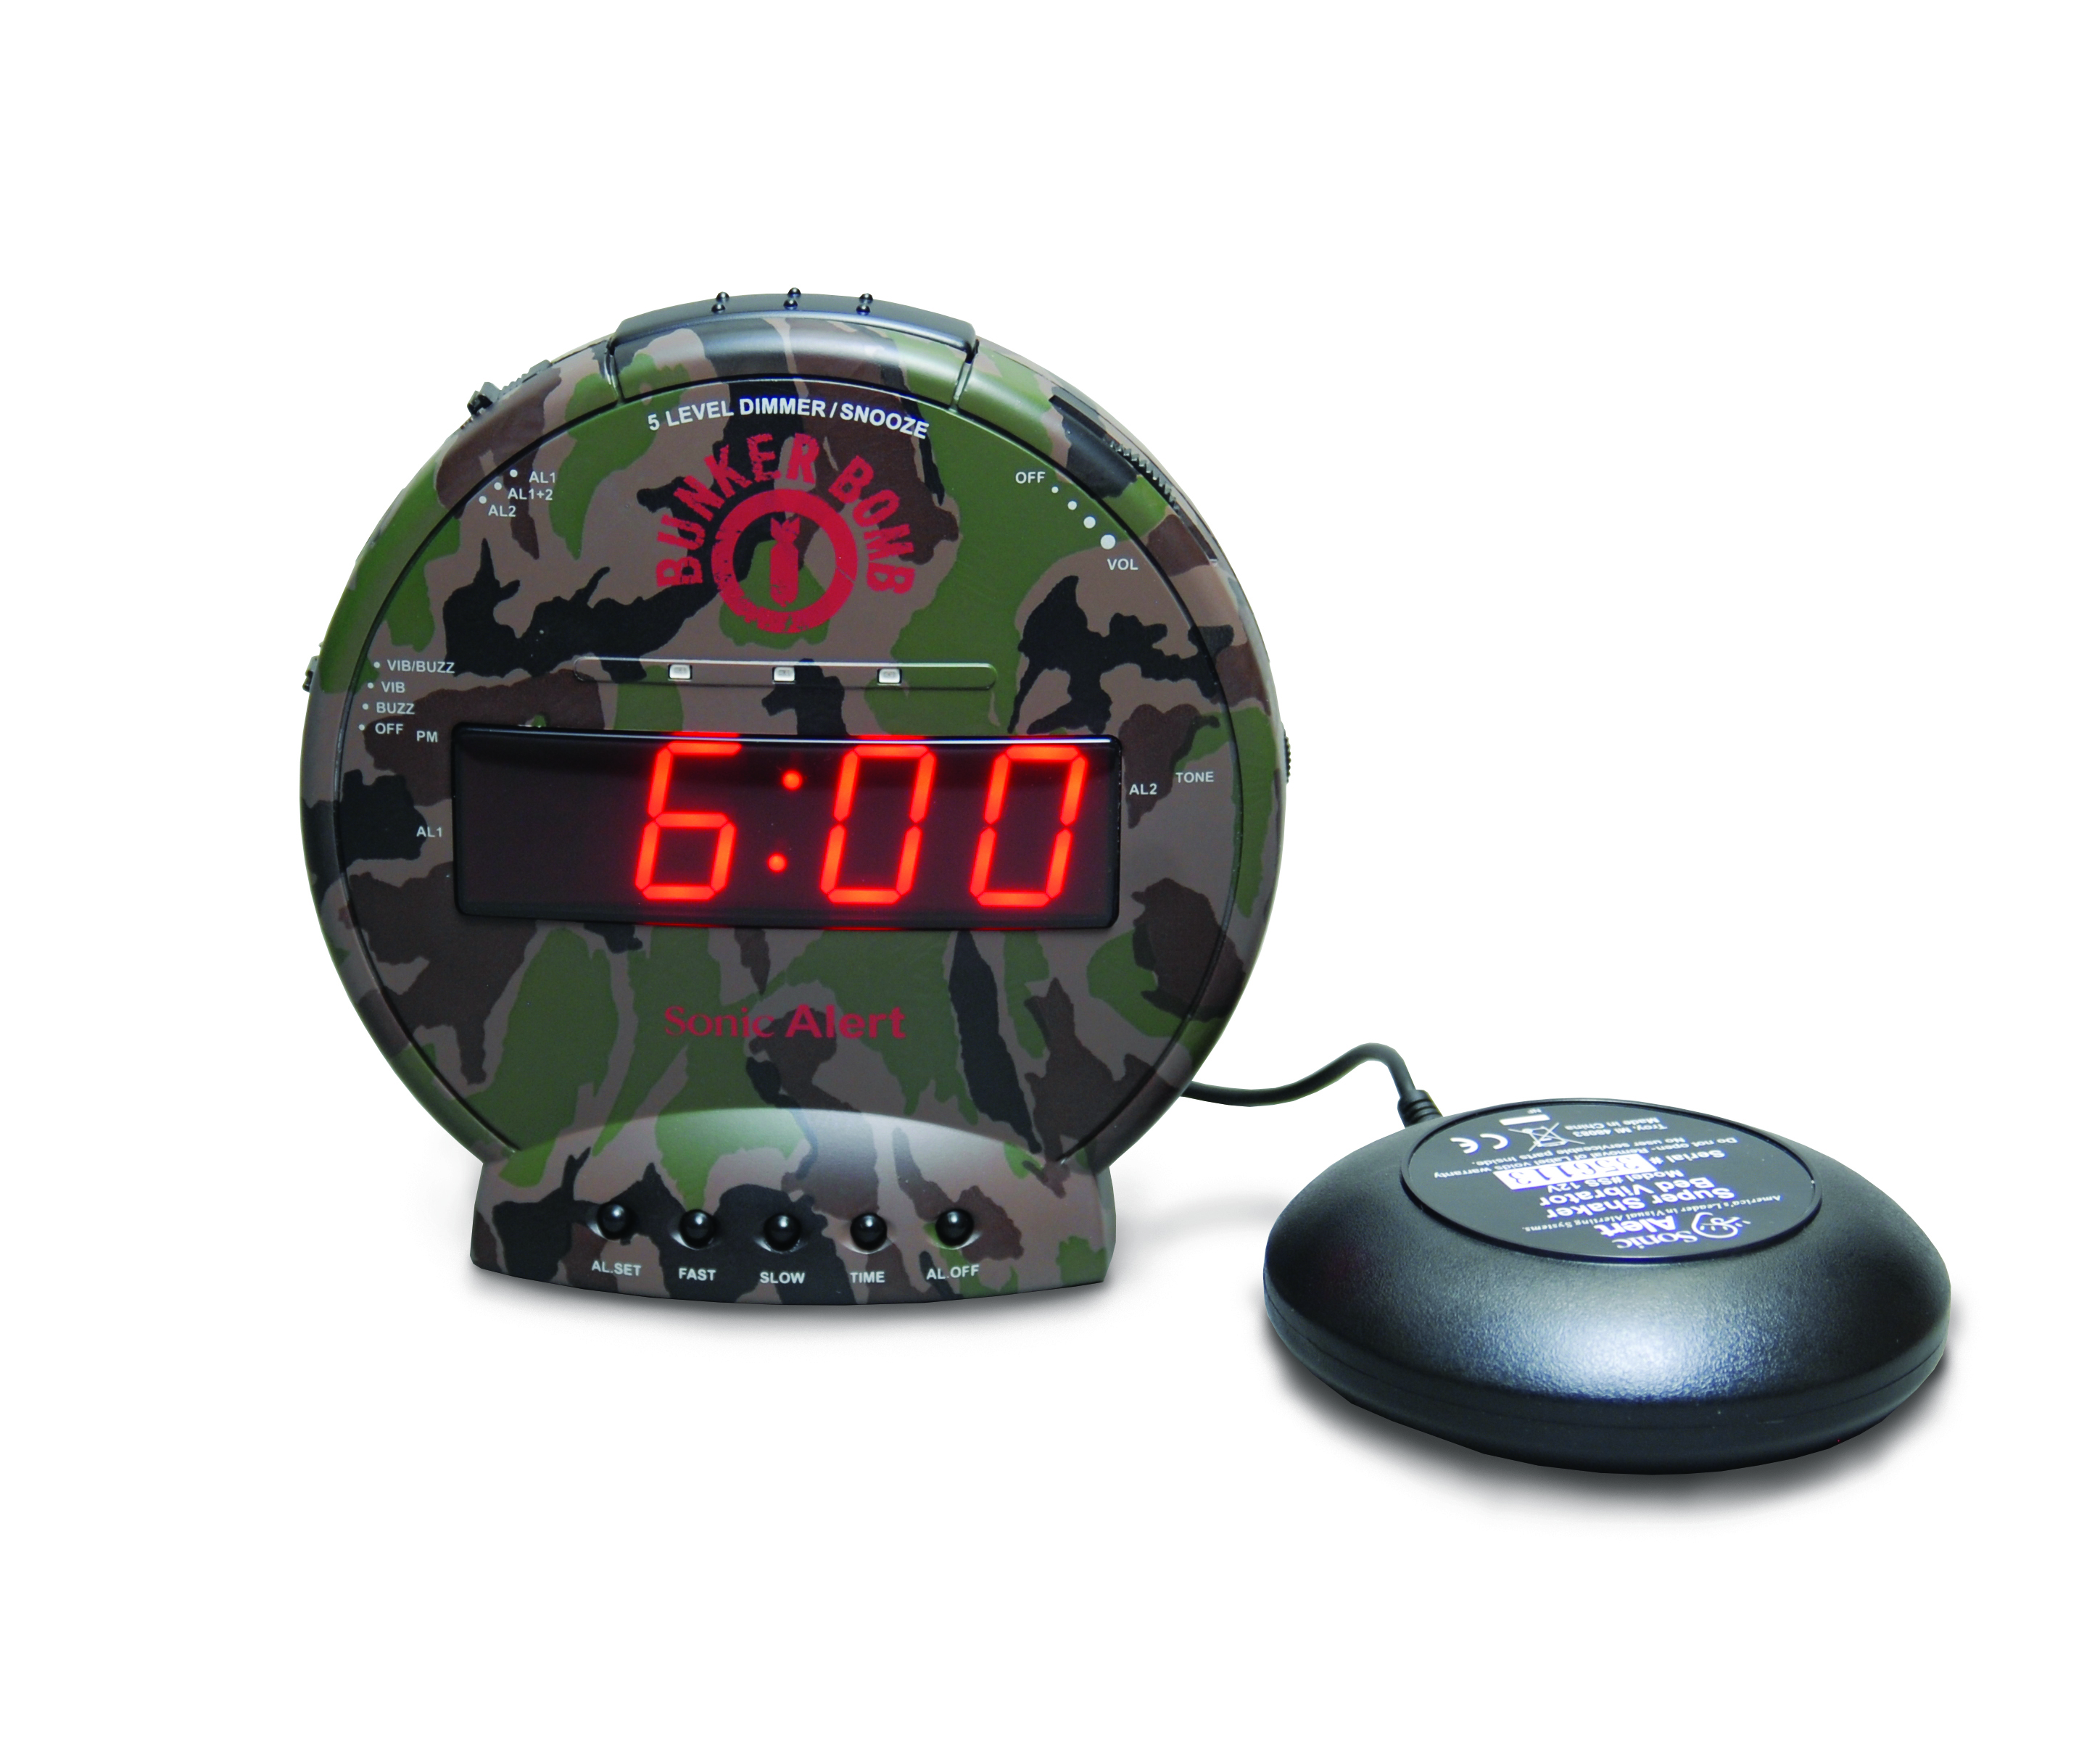 The Sonic Bomb vibrating alarm clock wakes the deaf, hard of hearing or deep sleepers.